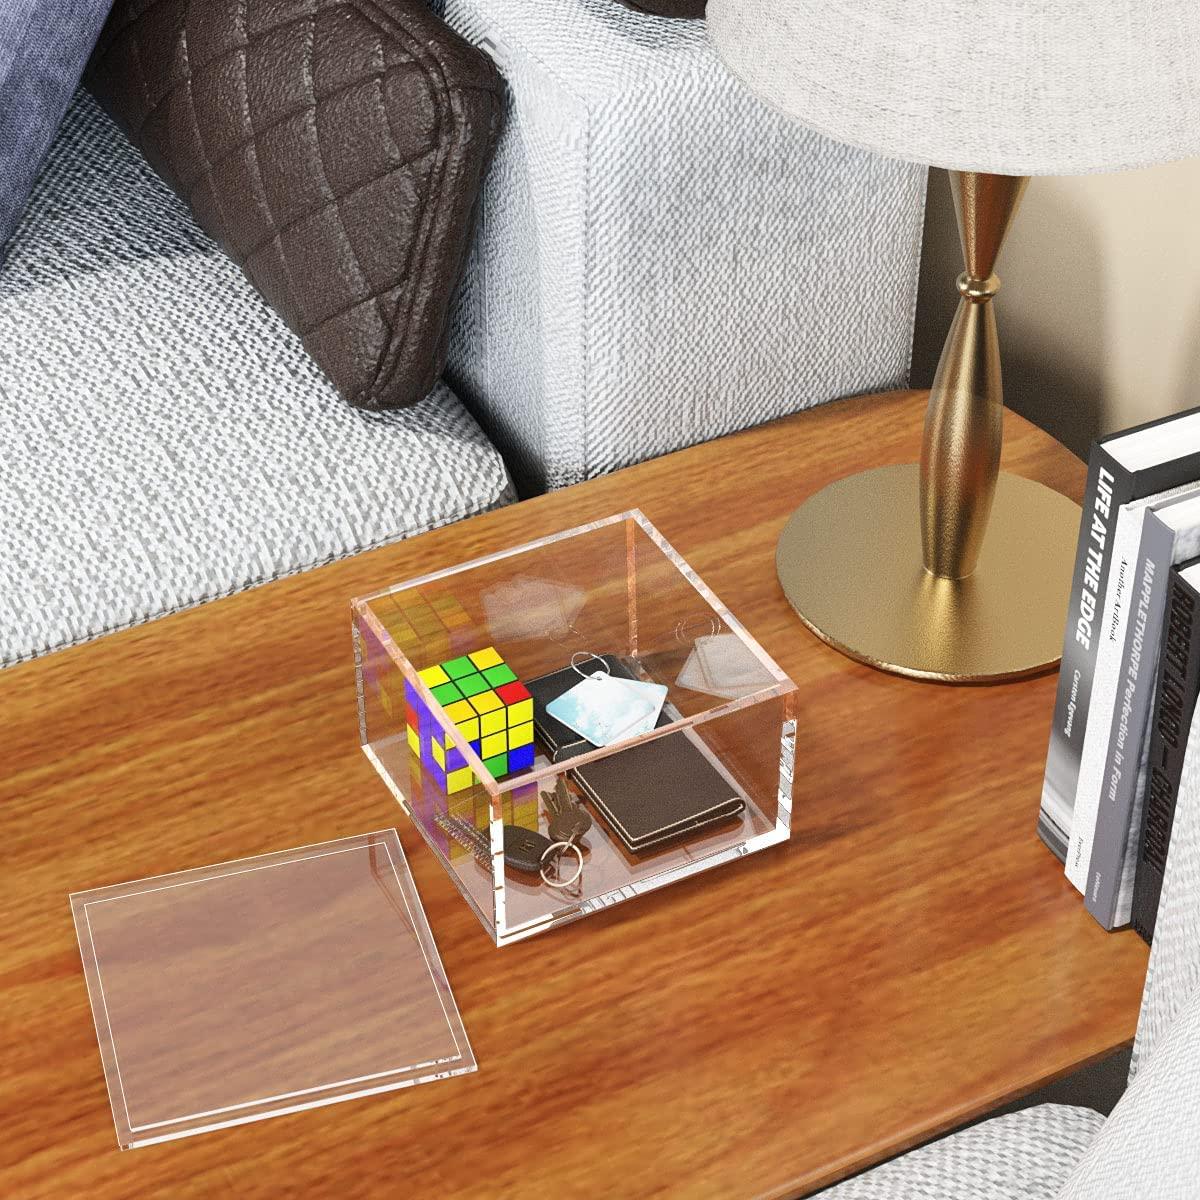 Buy Clear Square Acrylic Box with Lid to Hold Staples